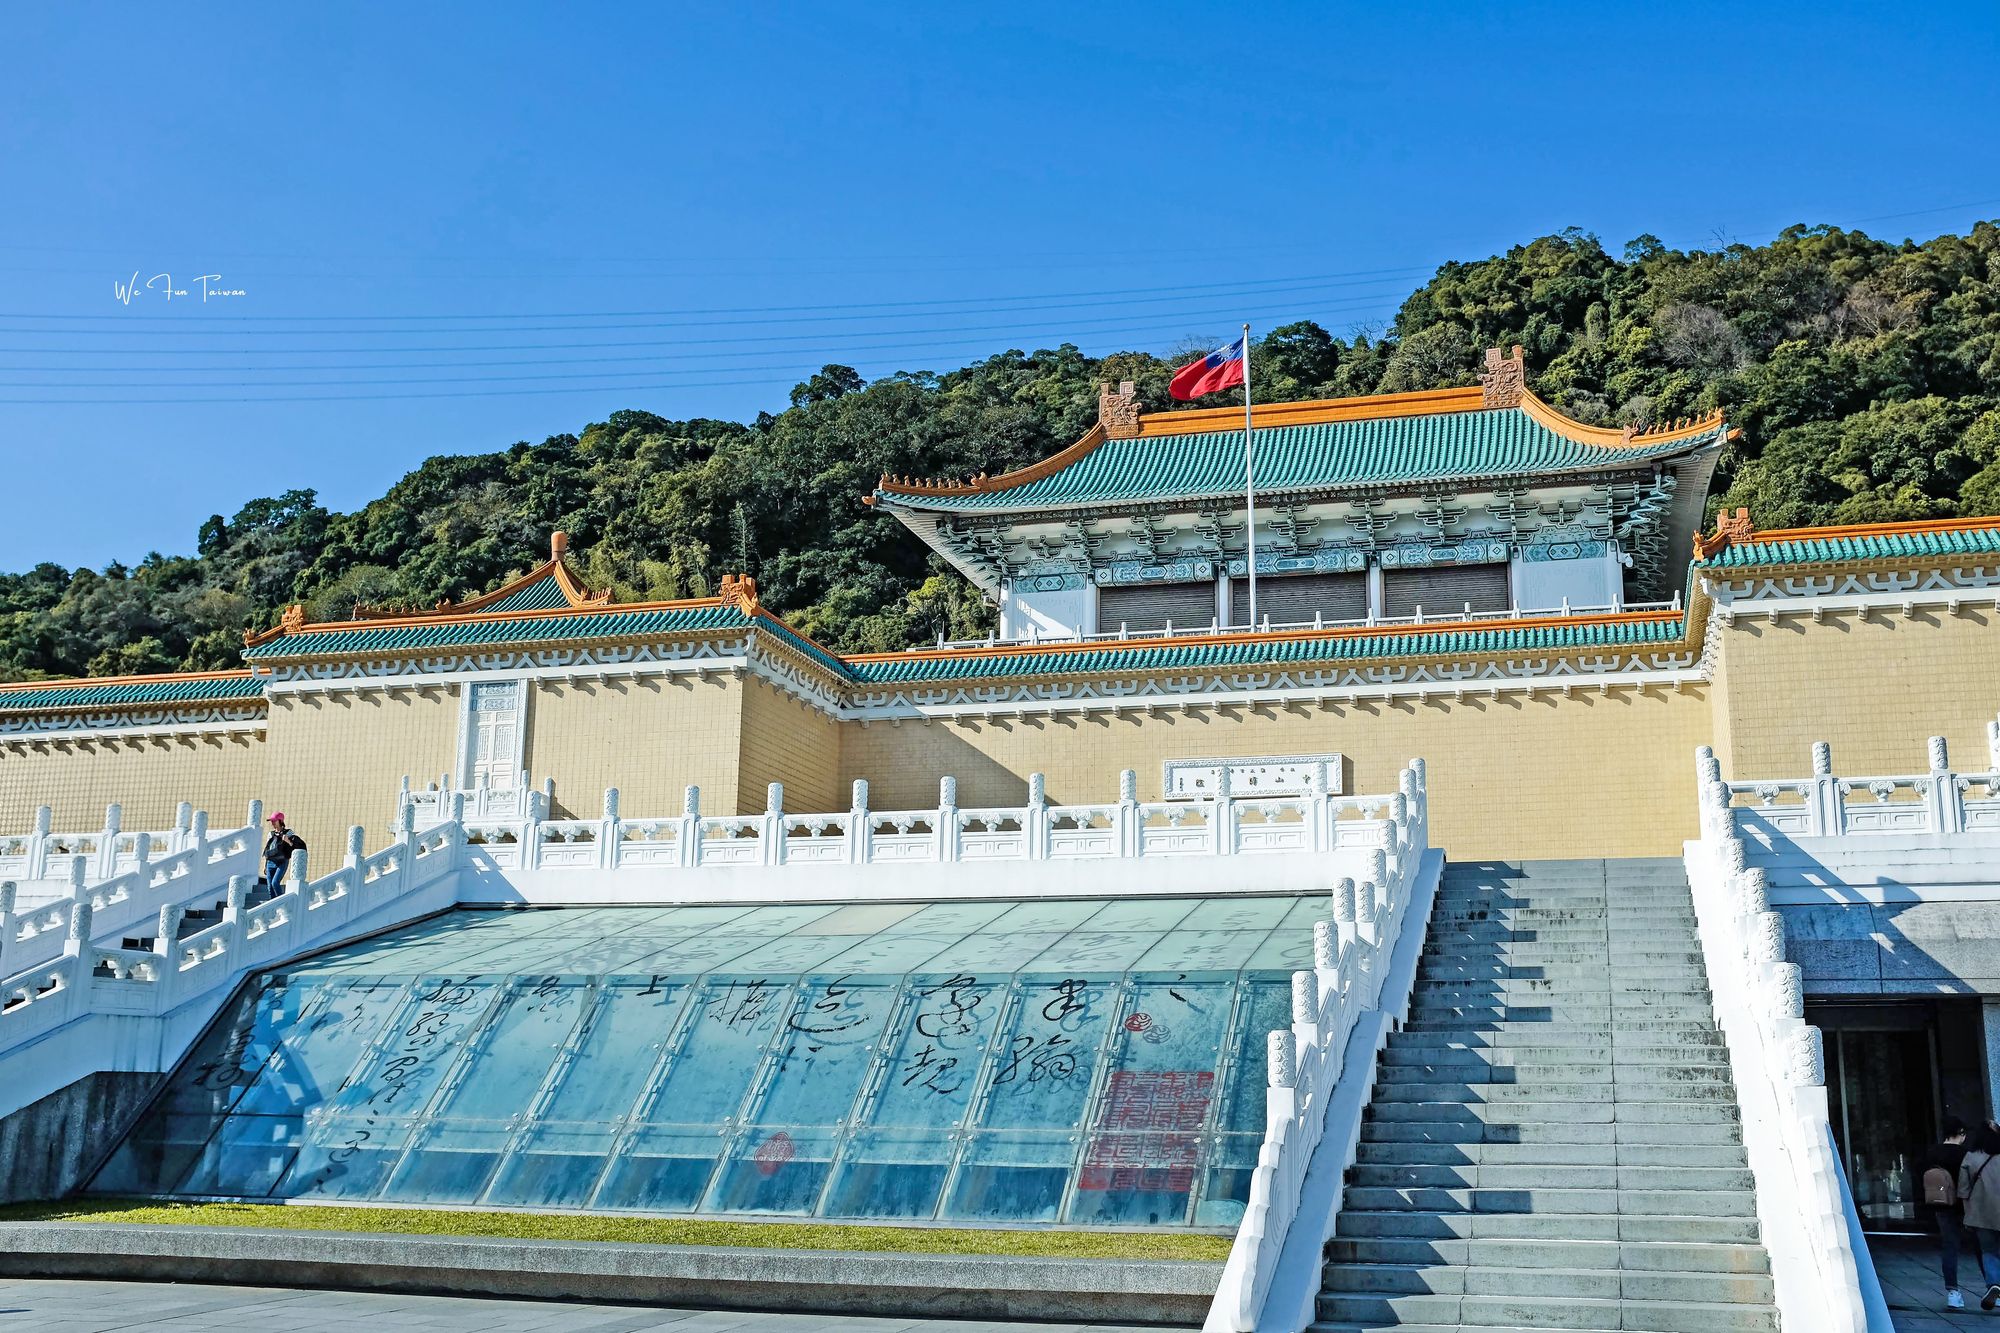 National Palace Museum of Taiwan – Explore 5,000 Years of Chinese history